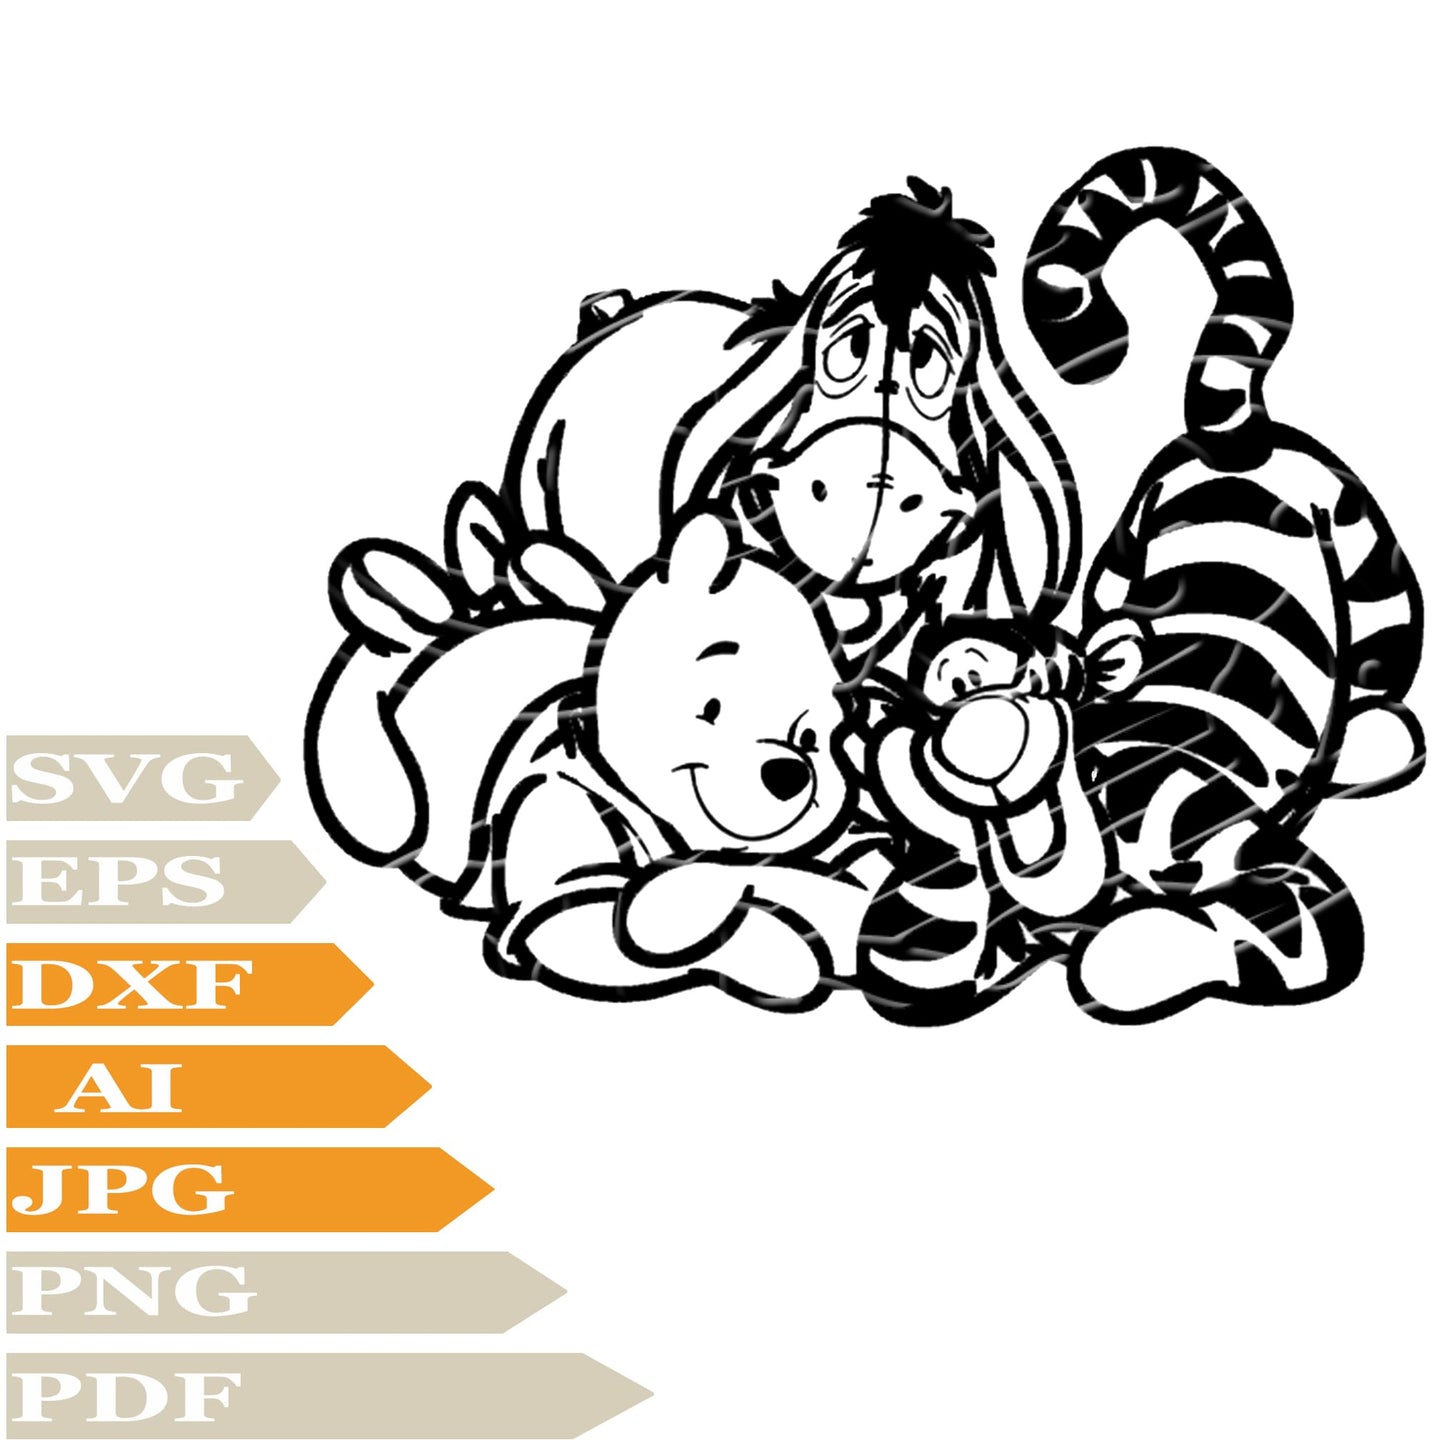 Winnie the Pooh Svg File, Image Cut, Png, For Tattoo, Silhouette, Digital Vector Download, Cut File, Clipart, For Cricut